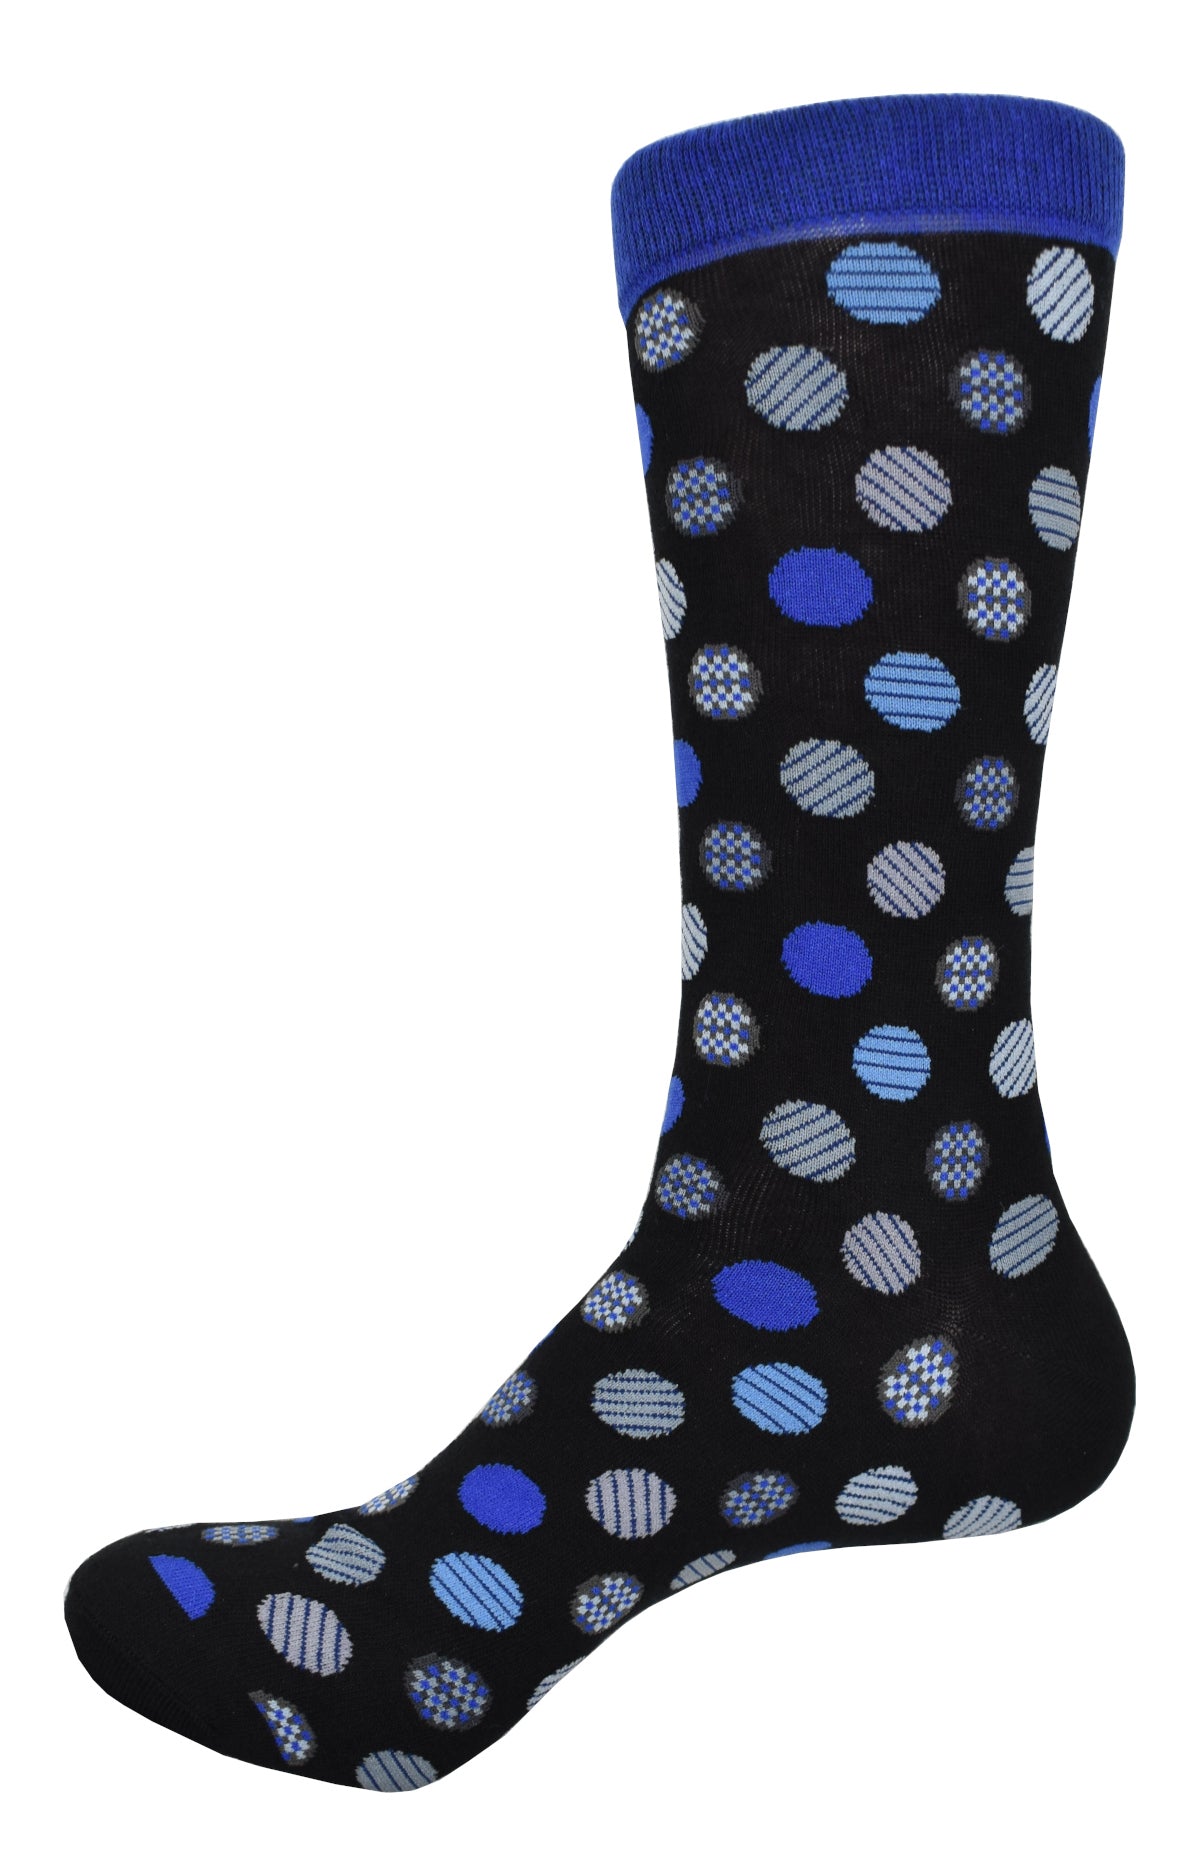 Elevate your sock game with our ZJ328 Geo Circles Socks. Made with soft mercerized cotton, nylon, and elastin, these socks provide ultimate comfort and stretch while adding a touch of style to any outfit. Say goodbye to boring socks and hello to a pop of cool.